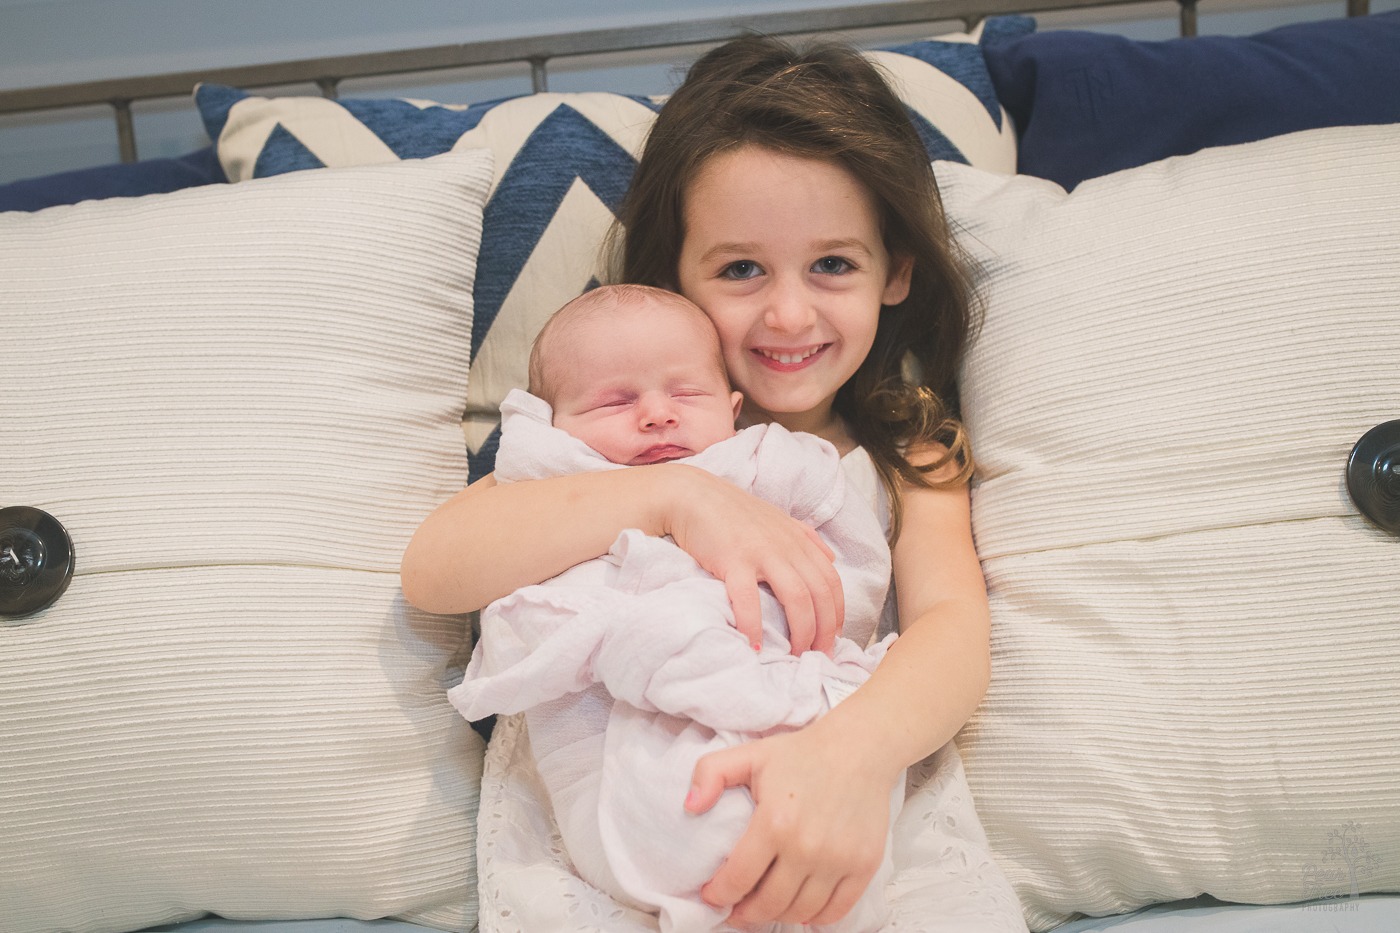 Big sister holding her newborn baby sister and smiling